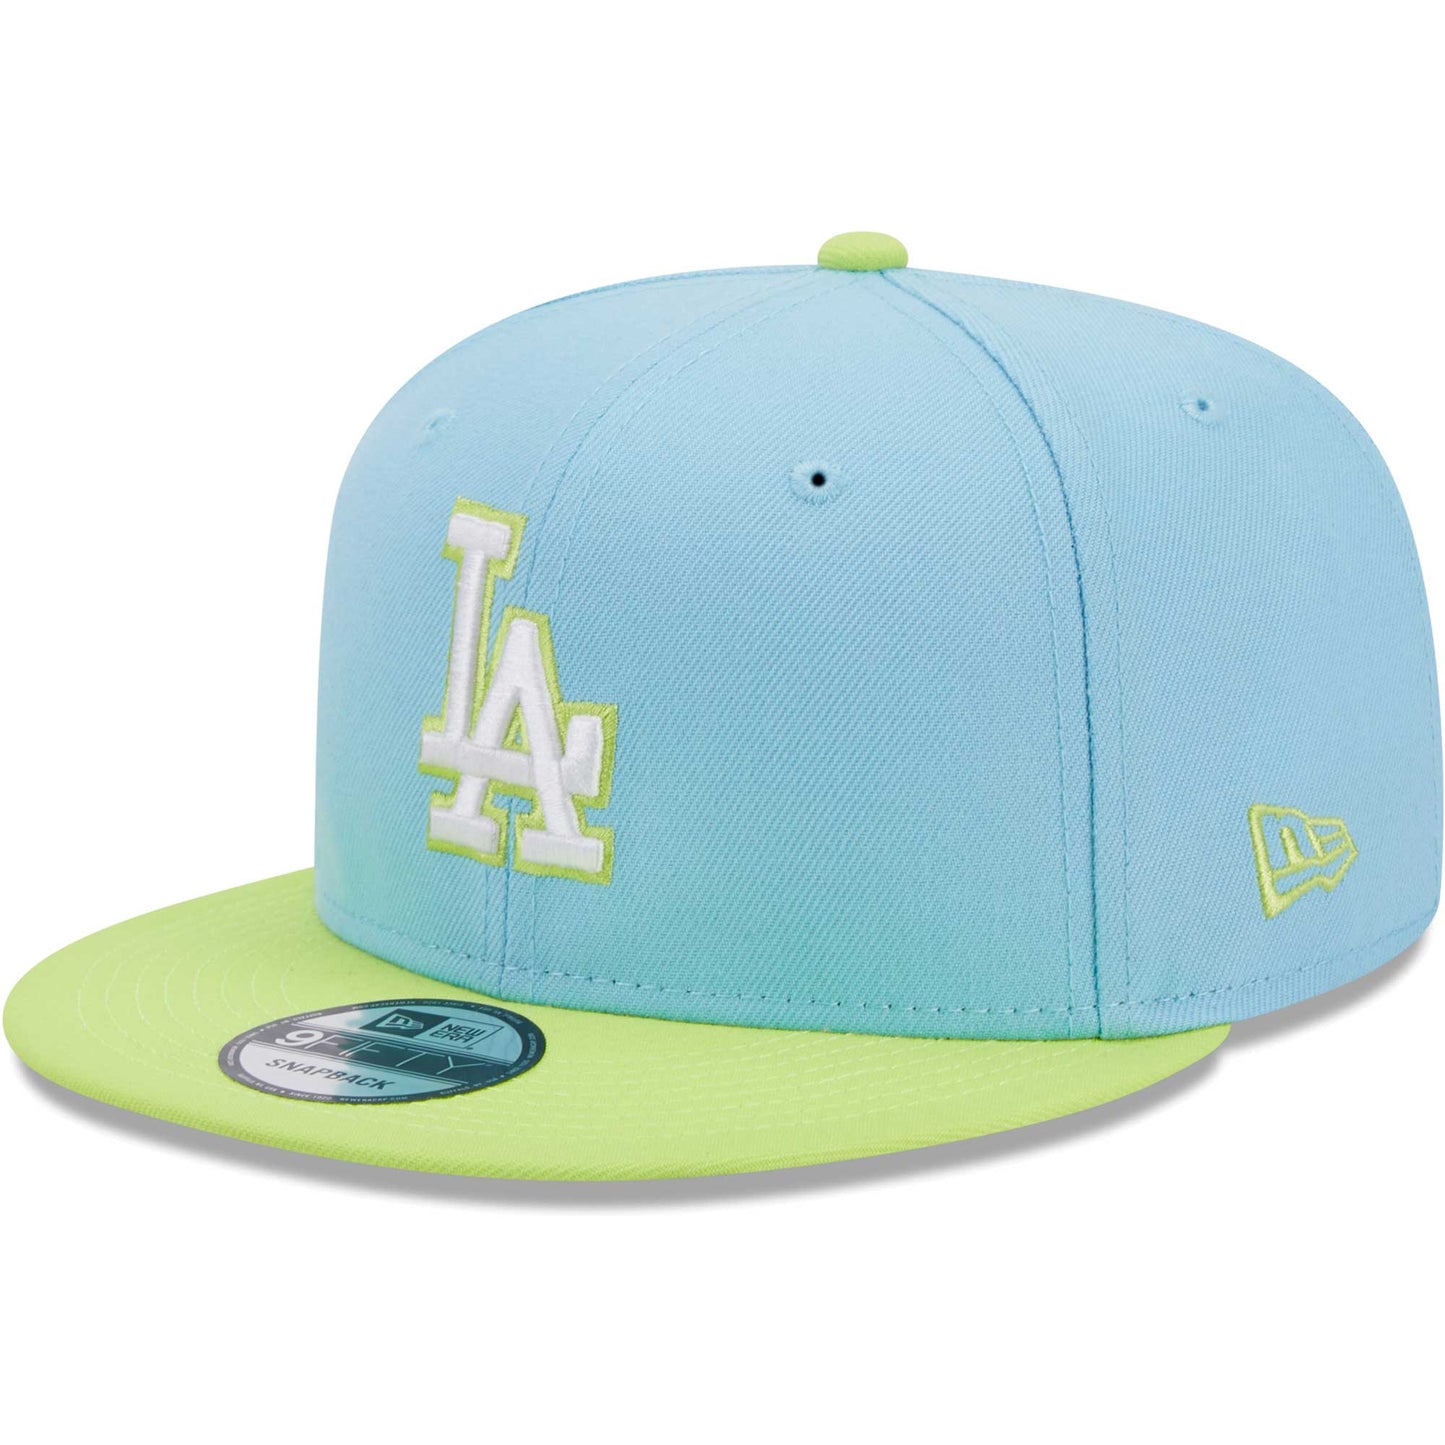 Los Angeles Dodgers New Era Spring Basic Two-Tone 9FIFTY Snapback Hat - Light Blue/Neon Green